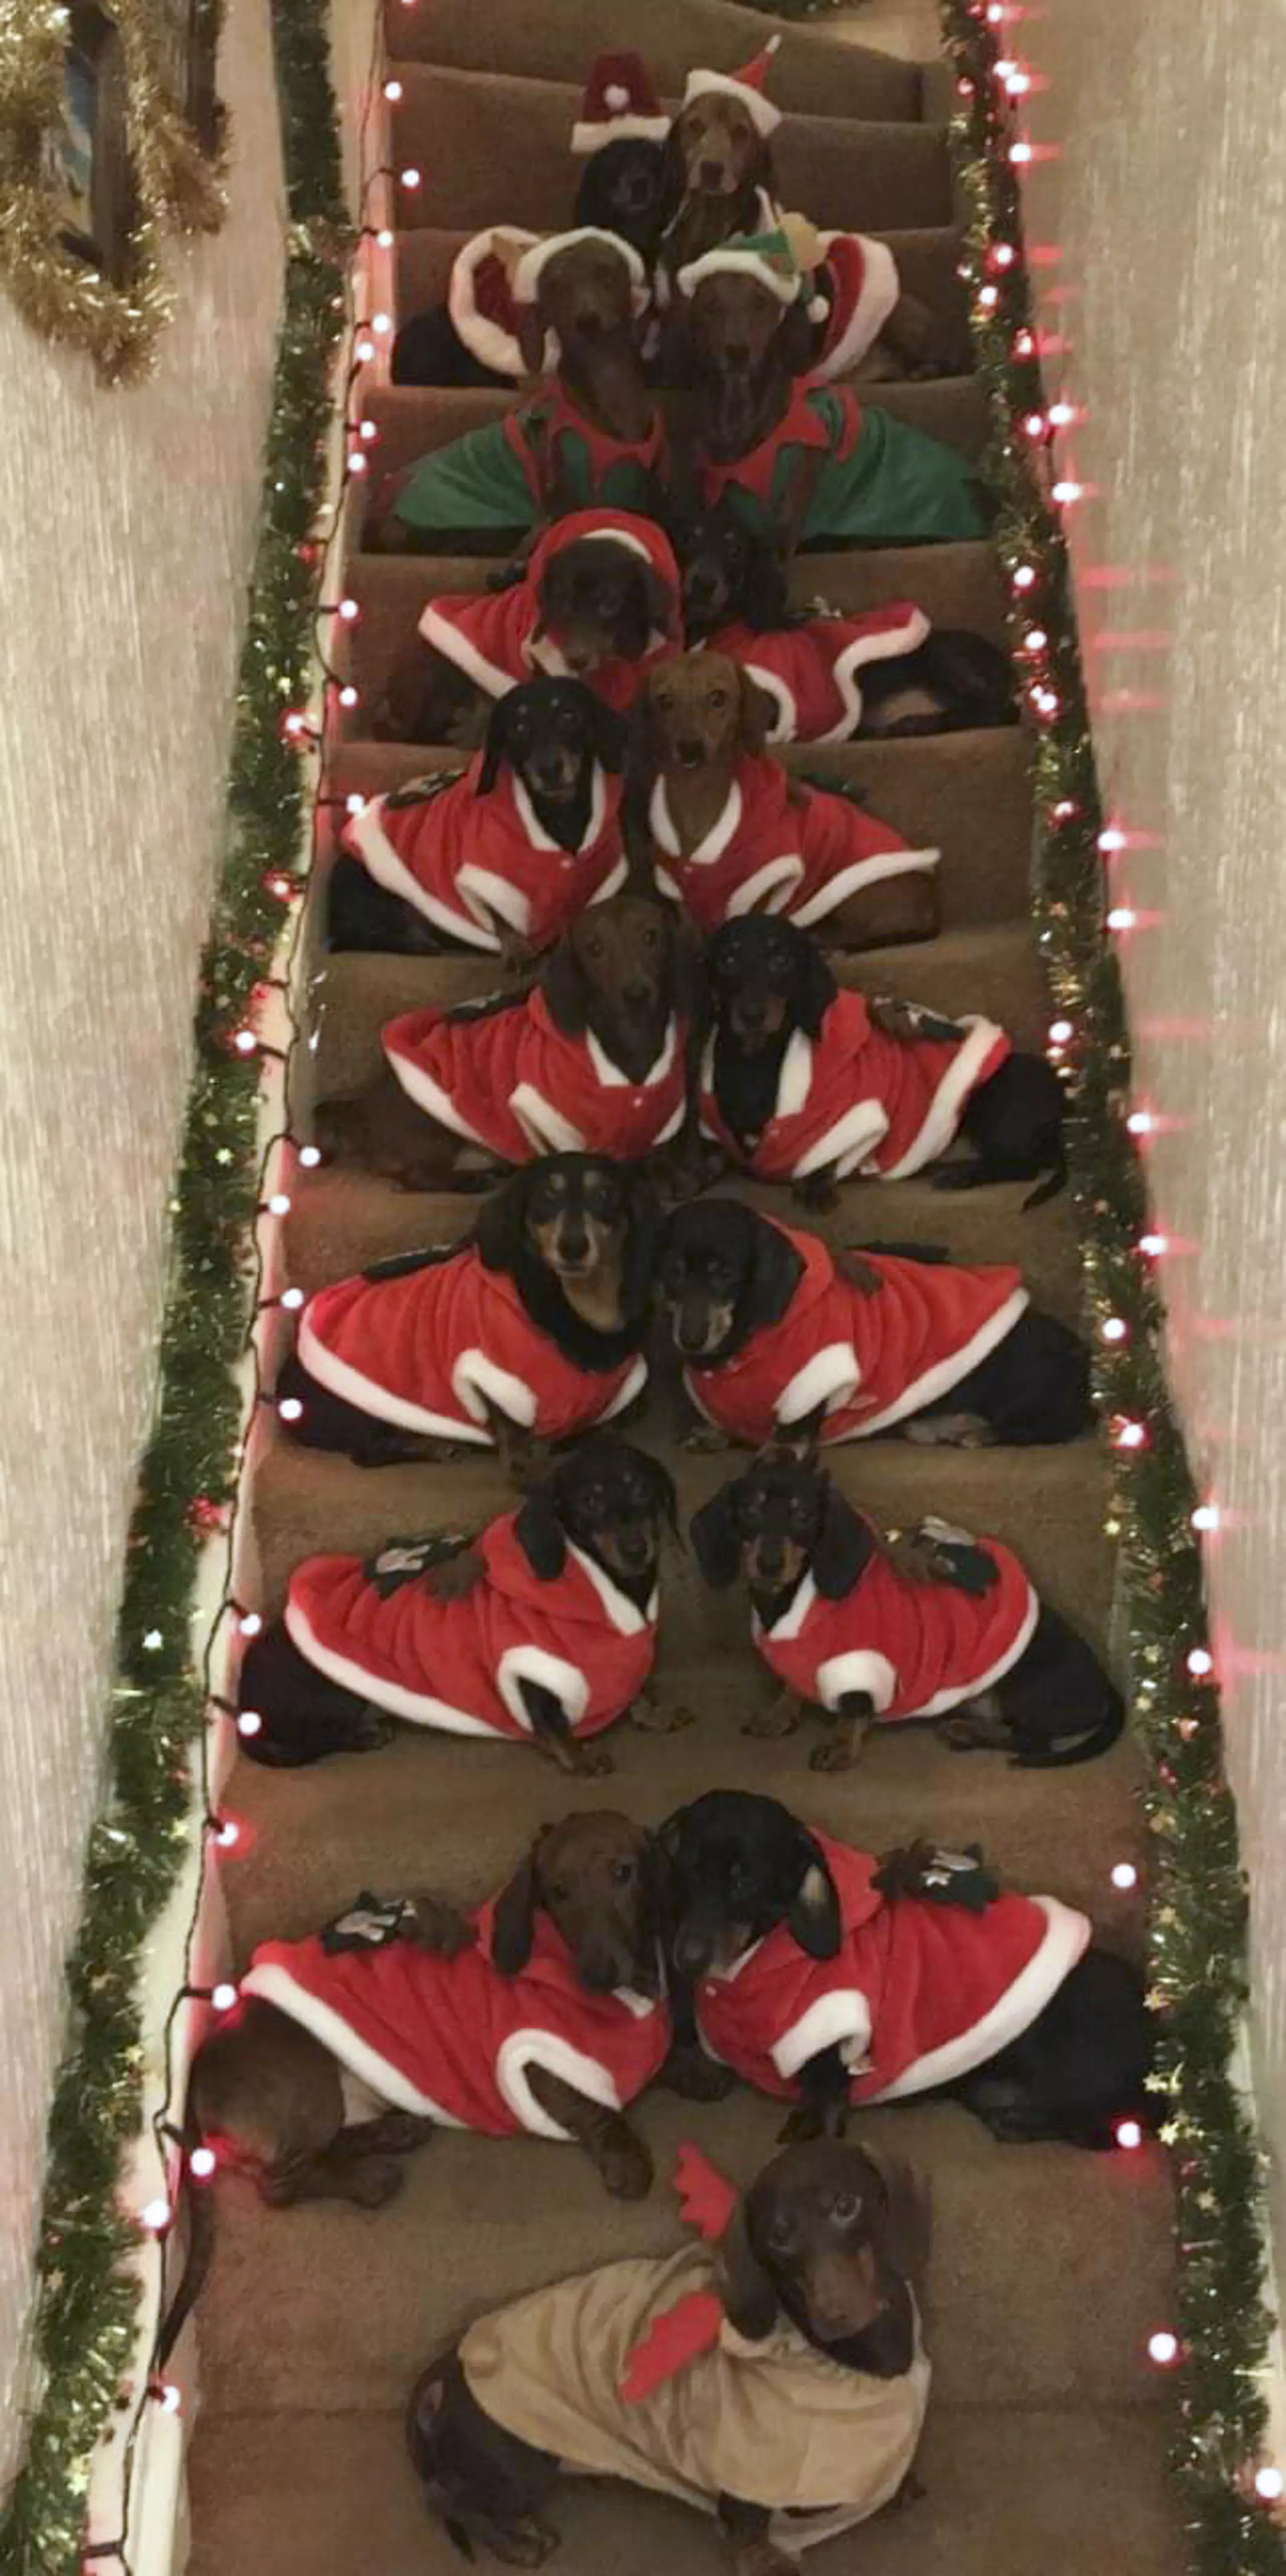 A pack of 17 sausage dogs have celebrated Christmas in style with their very own family photo (